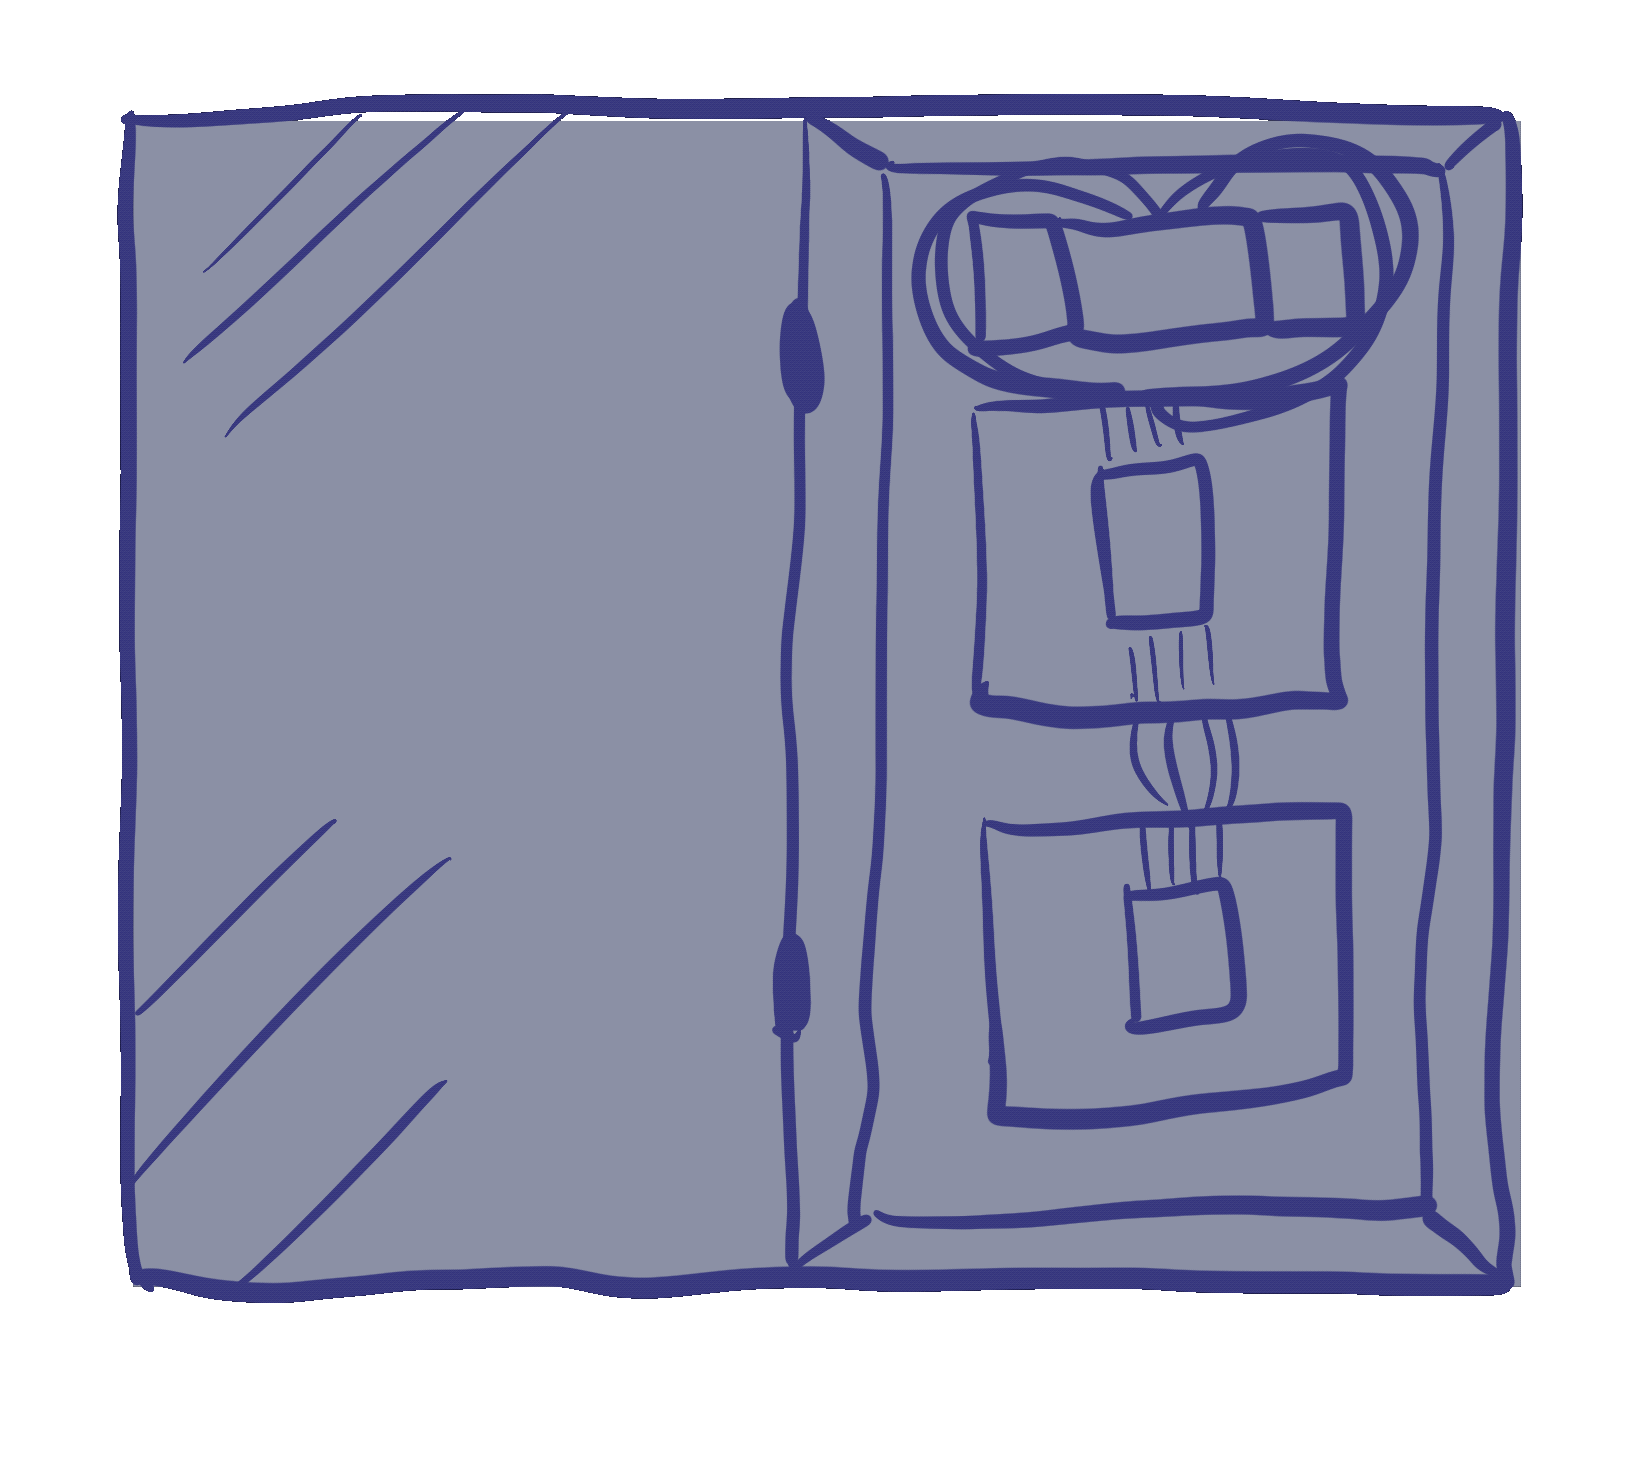 Animated dimming panel drawing